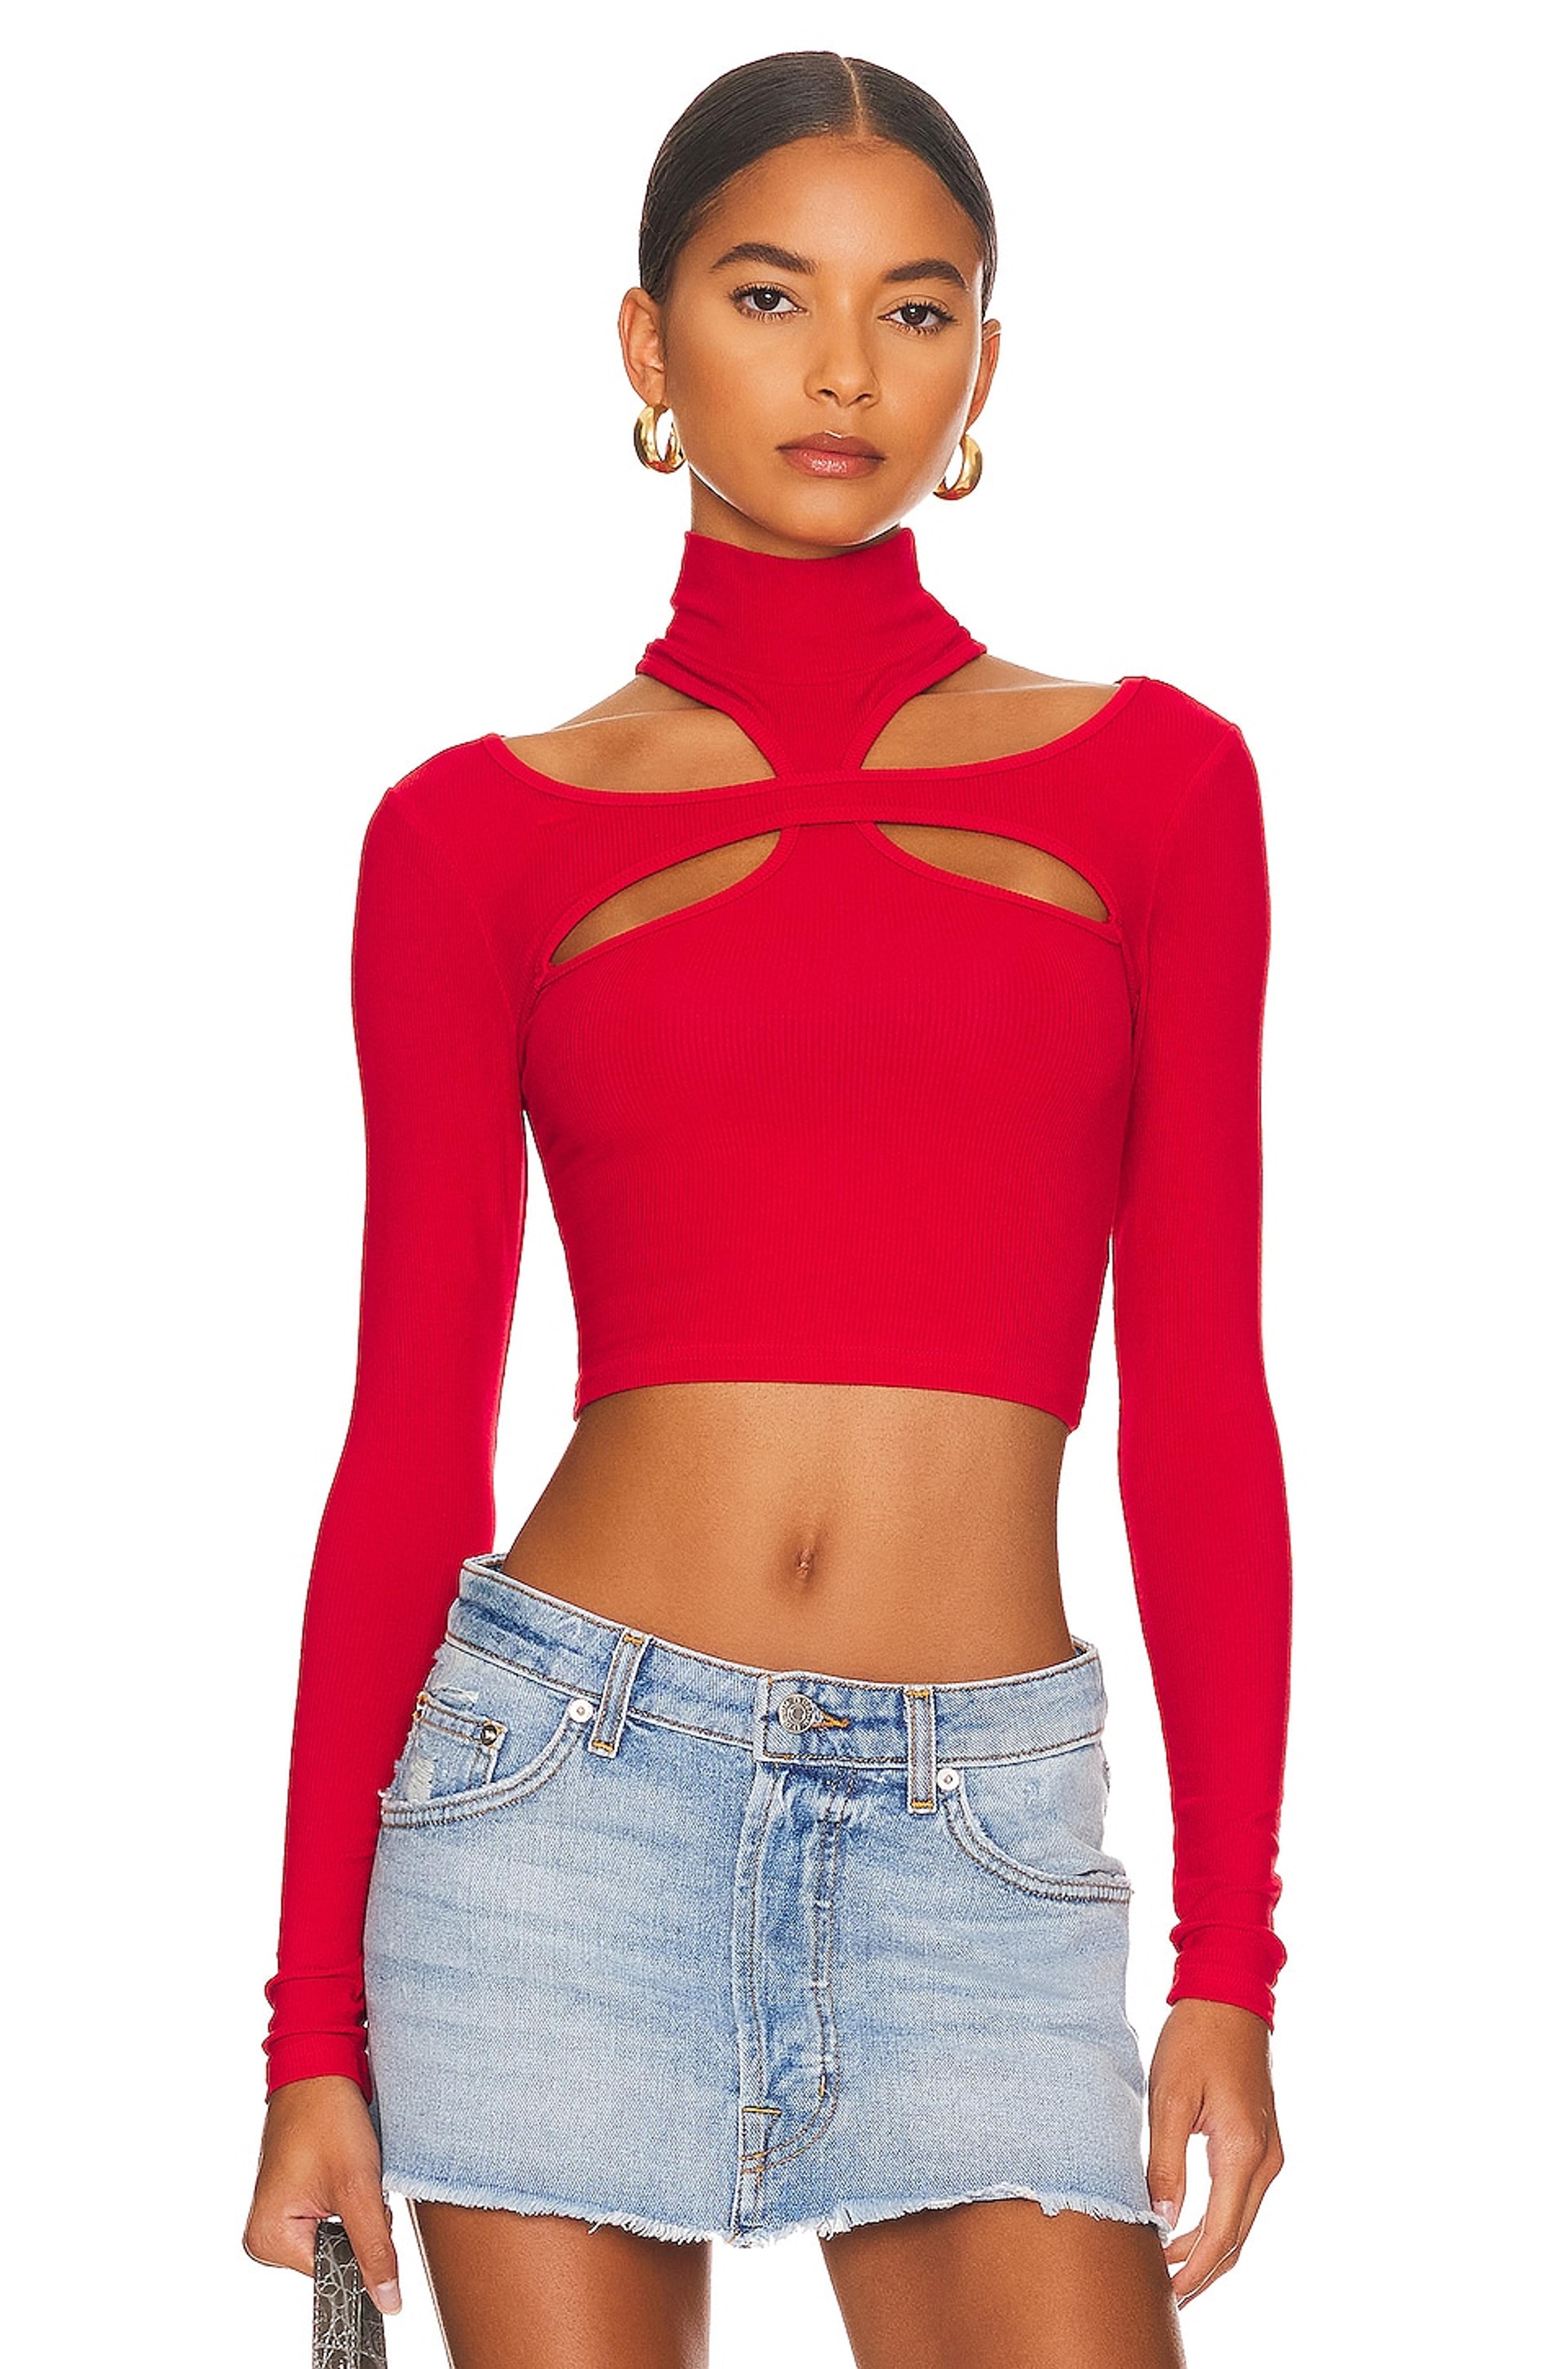 h:ours Alyson Cut Out Top in Red from Revolve.com